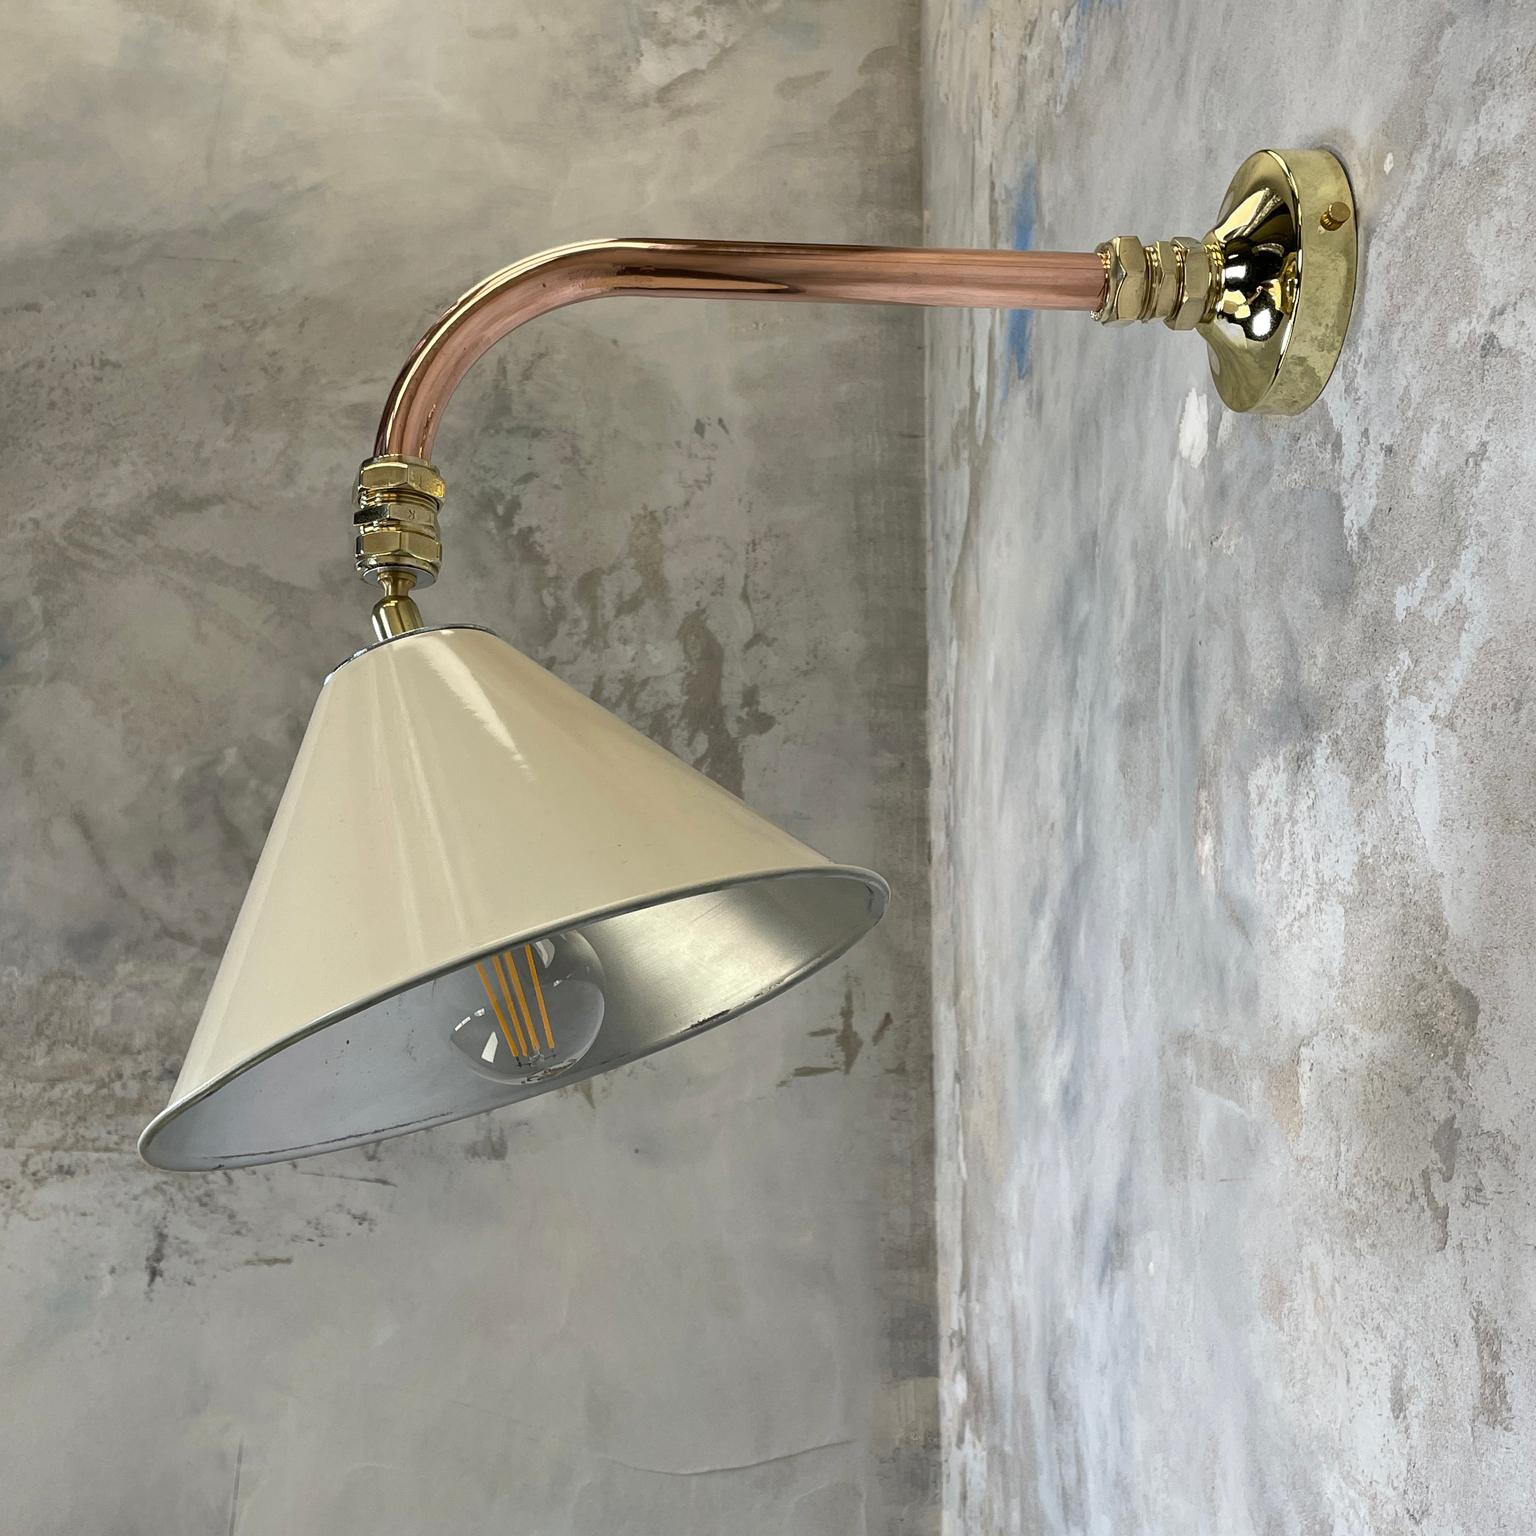 British army tilting festoon lamp shade fitted to a copper and brass cantilever wall fitting to create a bespoke wall light.

Professionally restored and converted by hand in UK by Loomlight to modern lighting standards, ready for contemporary